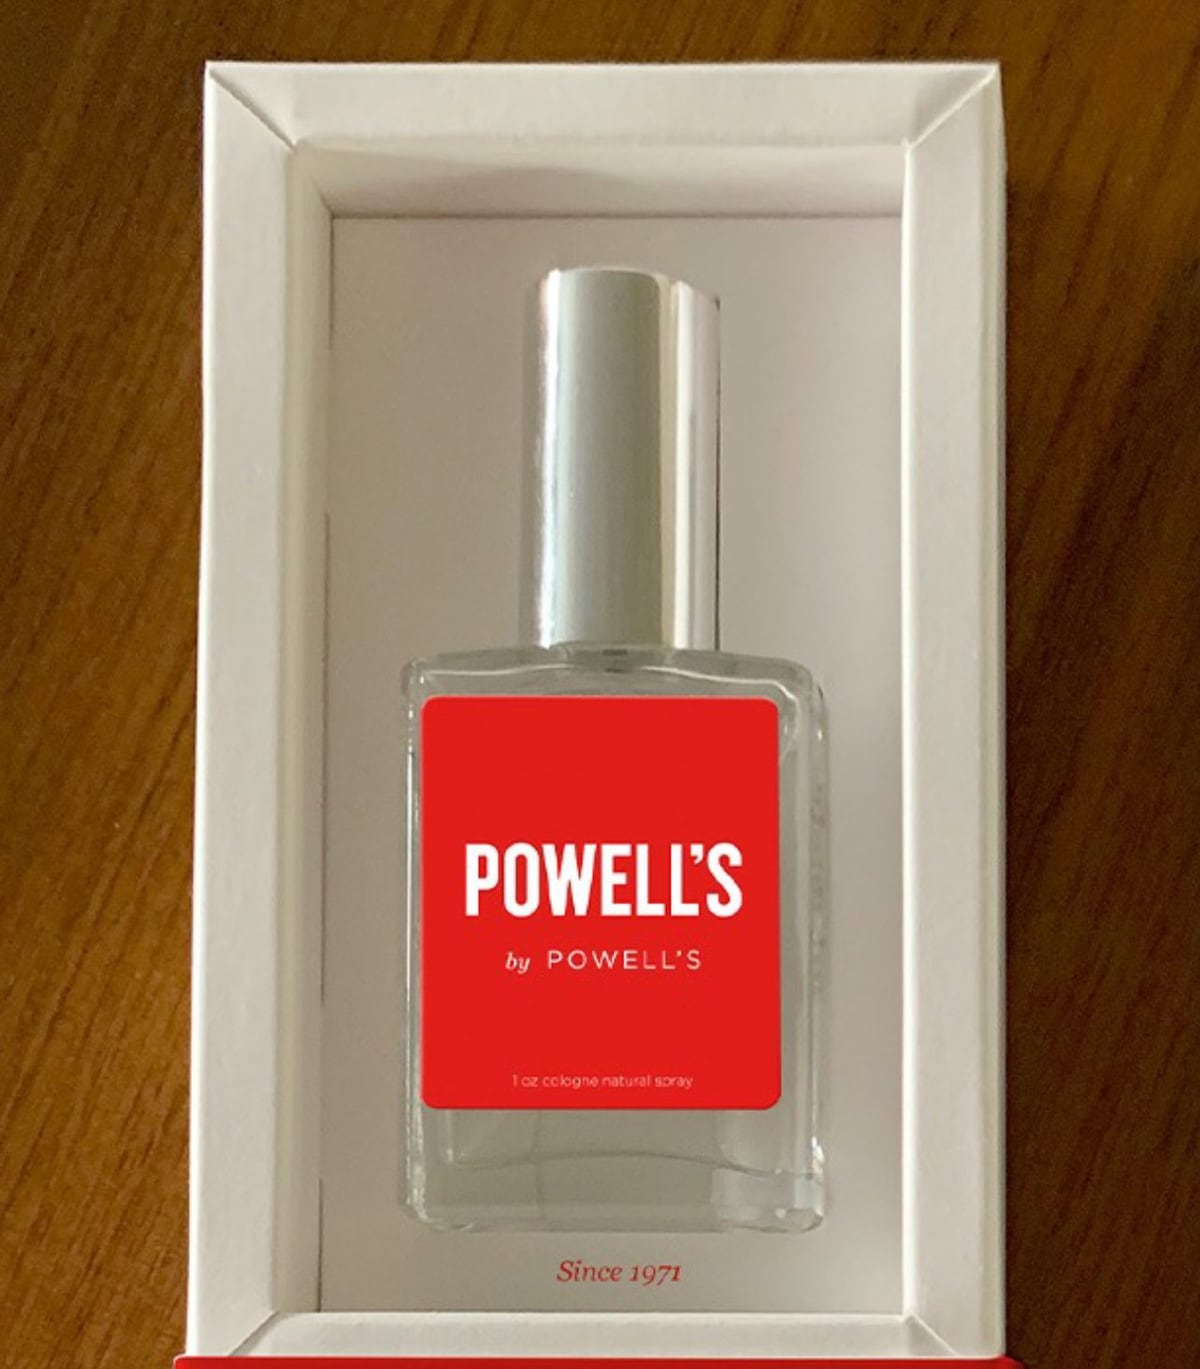 Want to Smell Like a Bookstore for Some Reason? Powell's Is Releasing Its Own Fragrance. Yes, Really. - Willamette Week